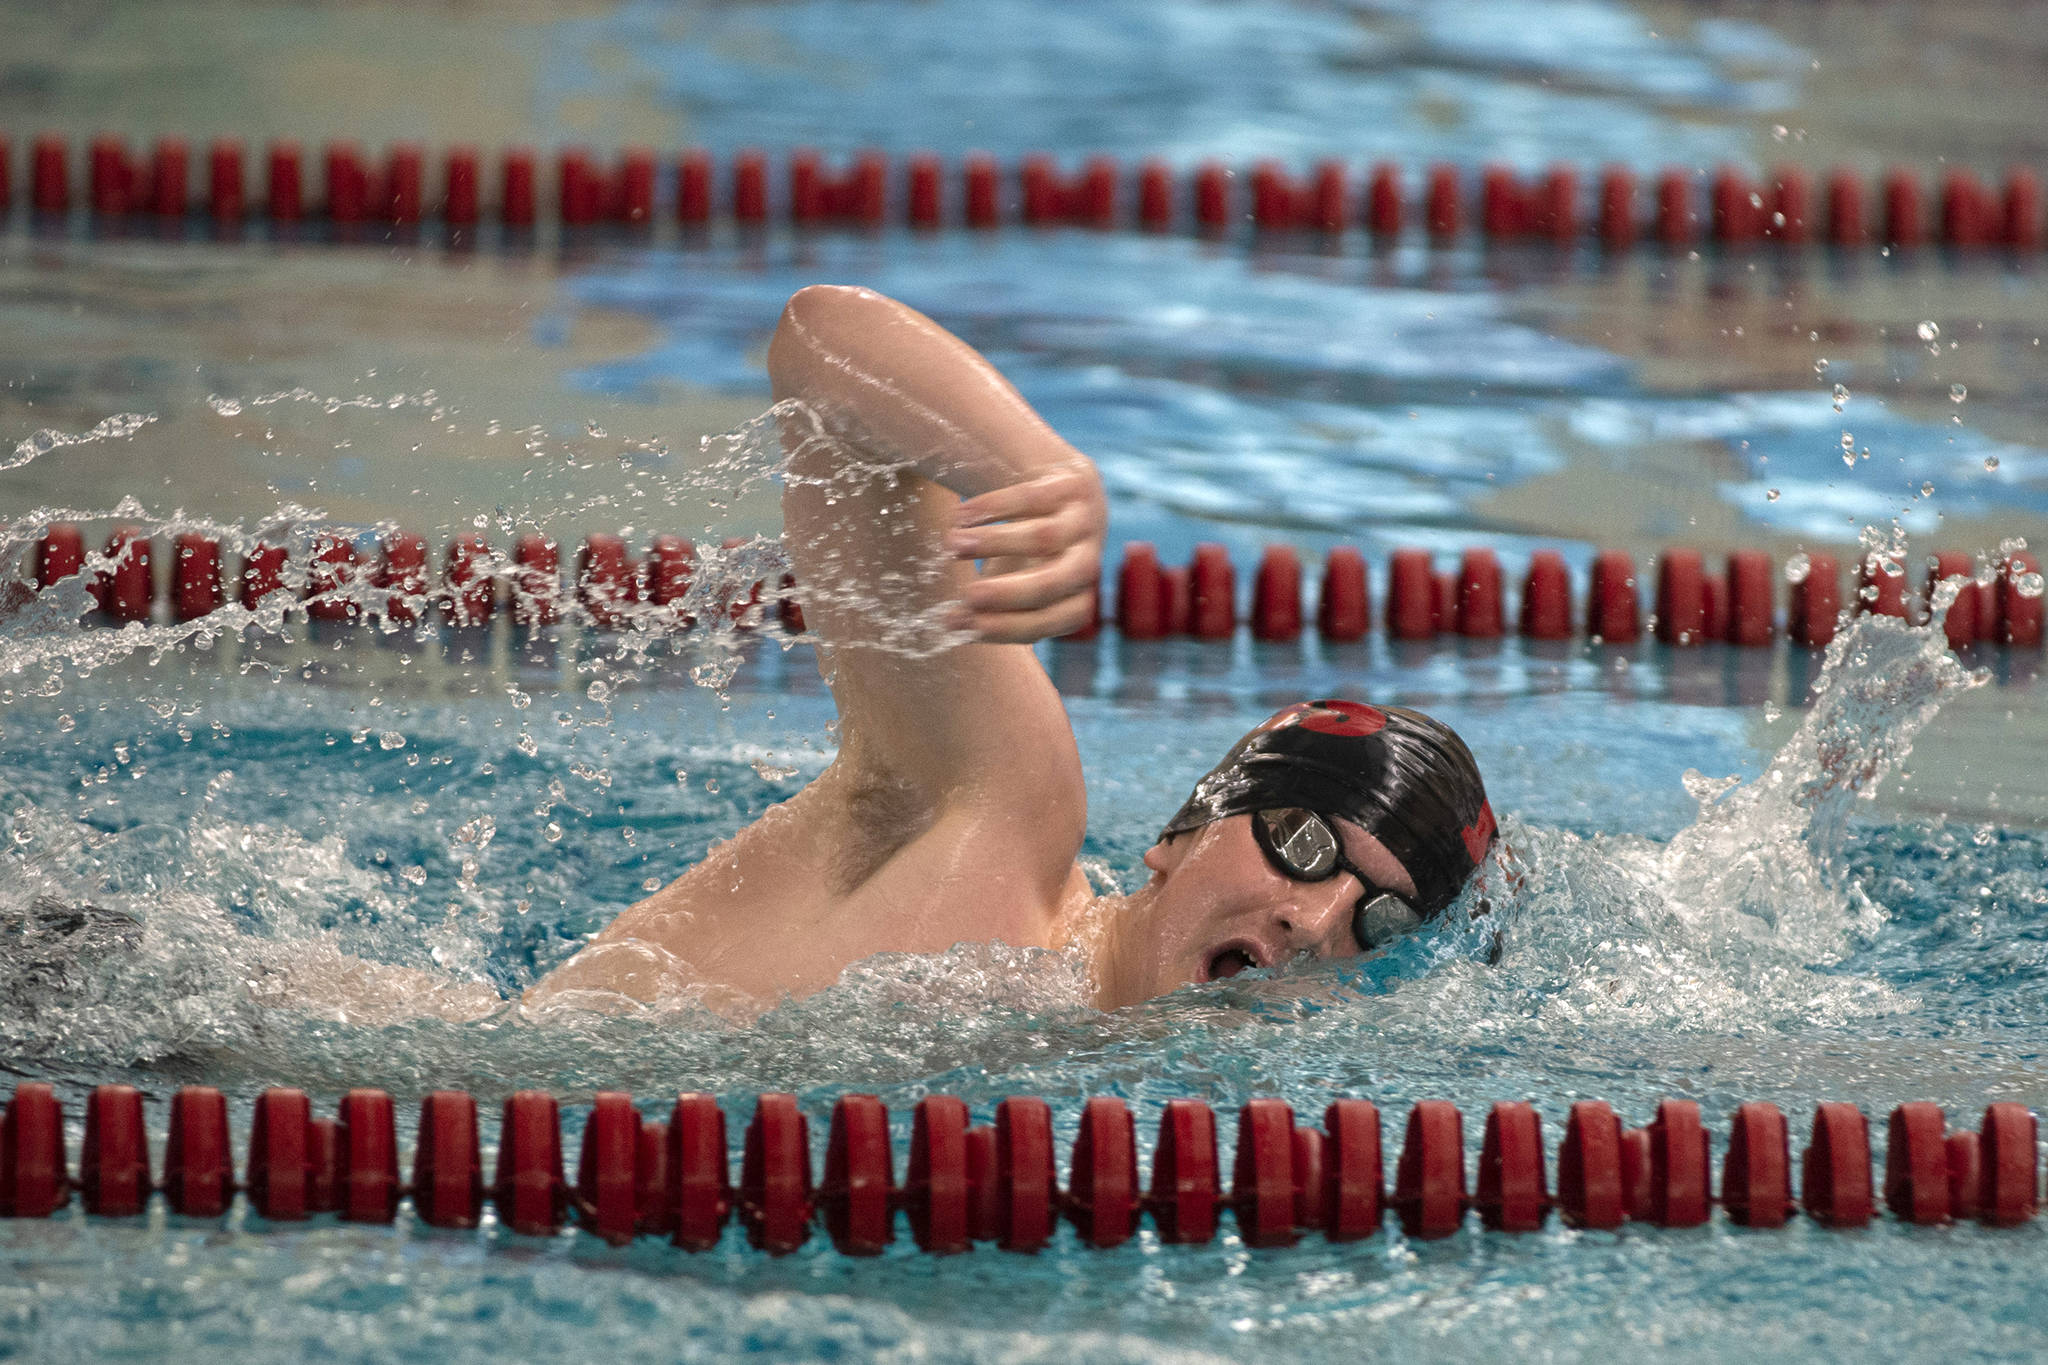 Juneau Douglas’ Caleb Peimann swims in the 500-yard freestyle final in the Region V Swimming and Diving Championships in Sitka on Saturday, Nov. 2, 2019. Peimann placed second with a time of 4 minutes, 50.13 seconds. (James Poulson | Sitka Sentinel)